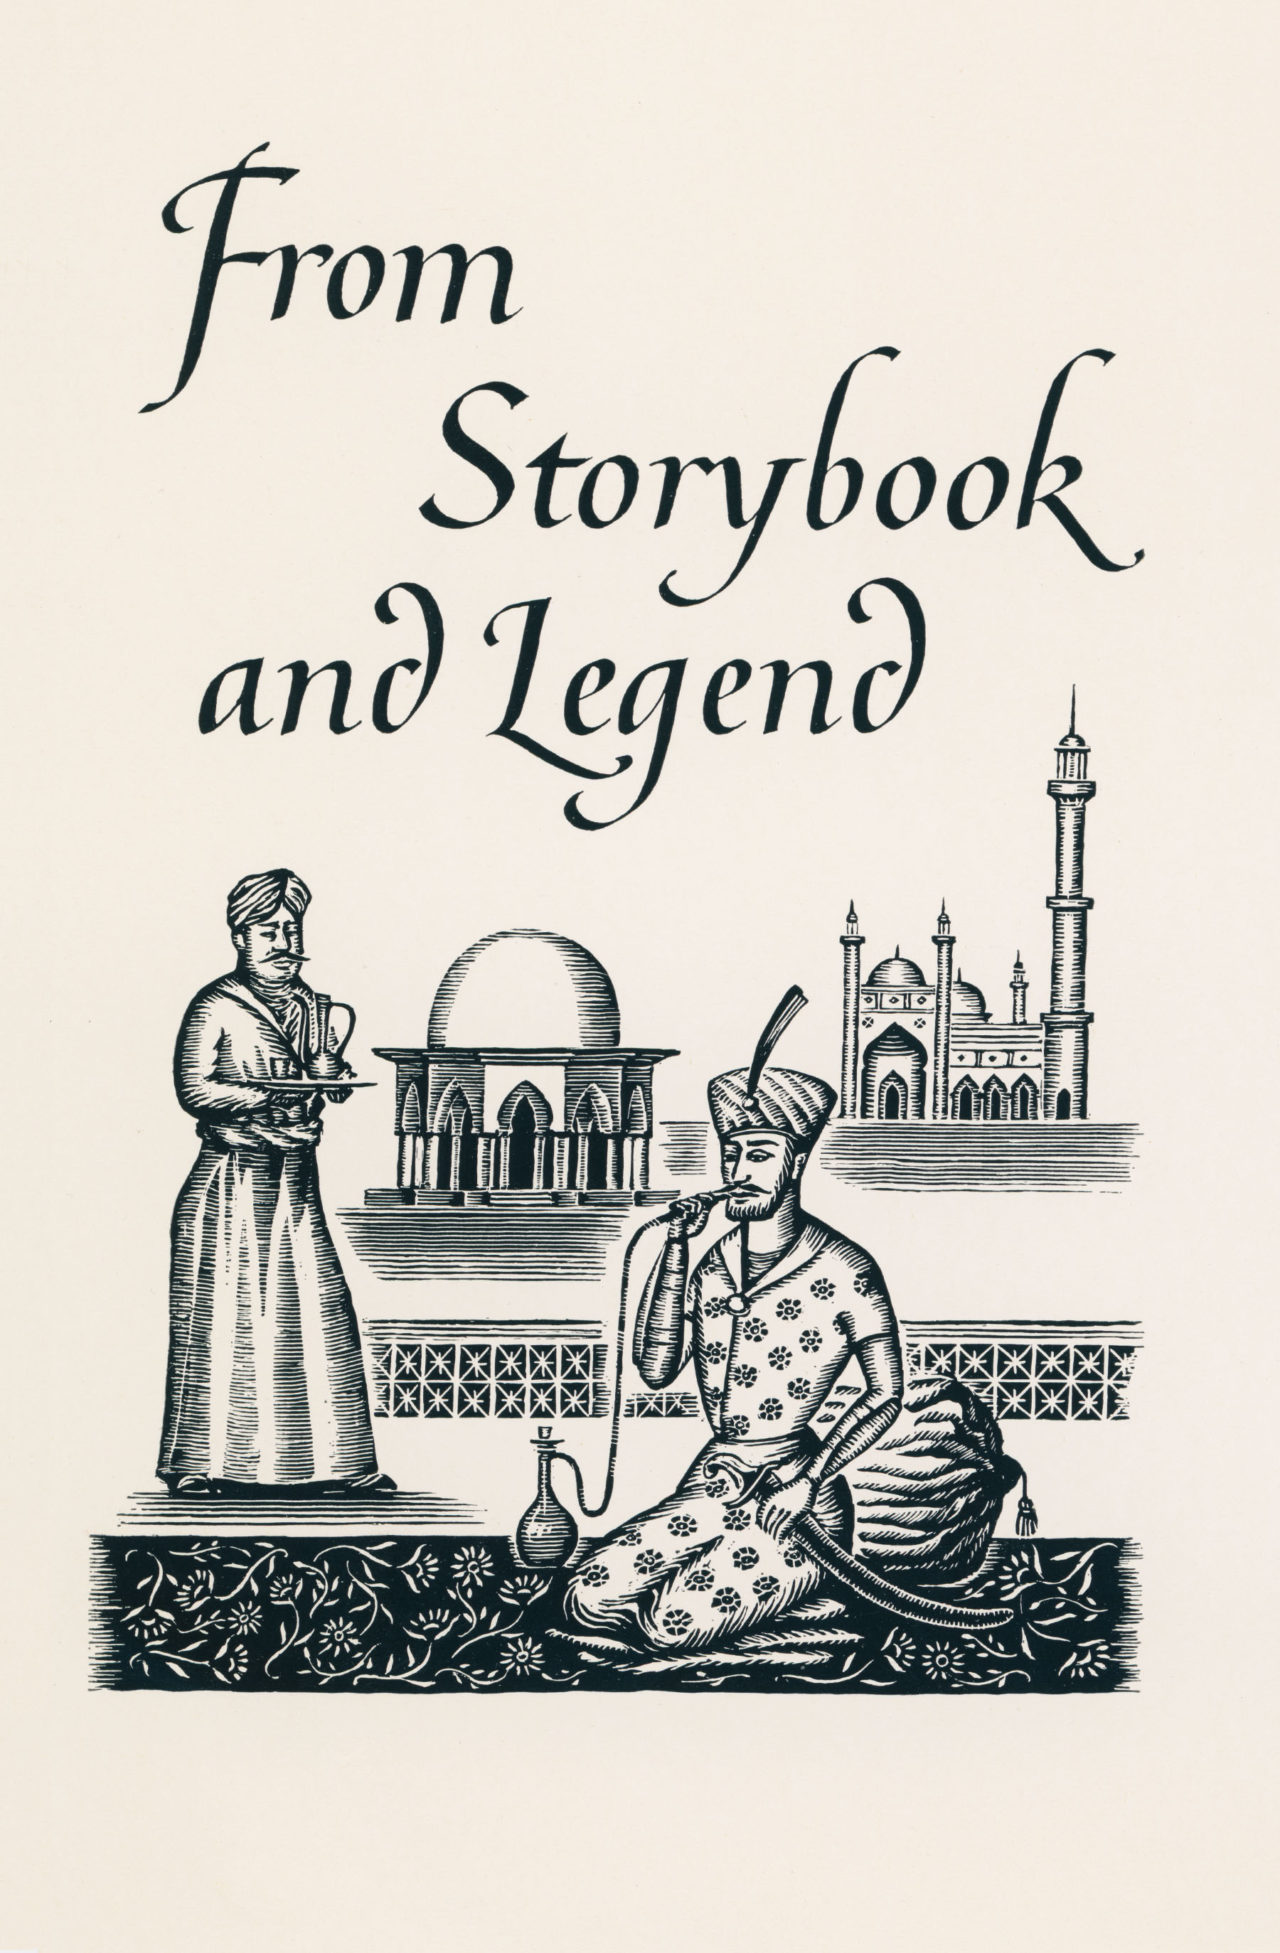 100 Poems About People: From Storybook and Legend